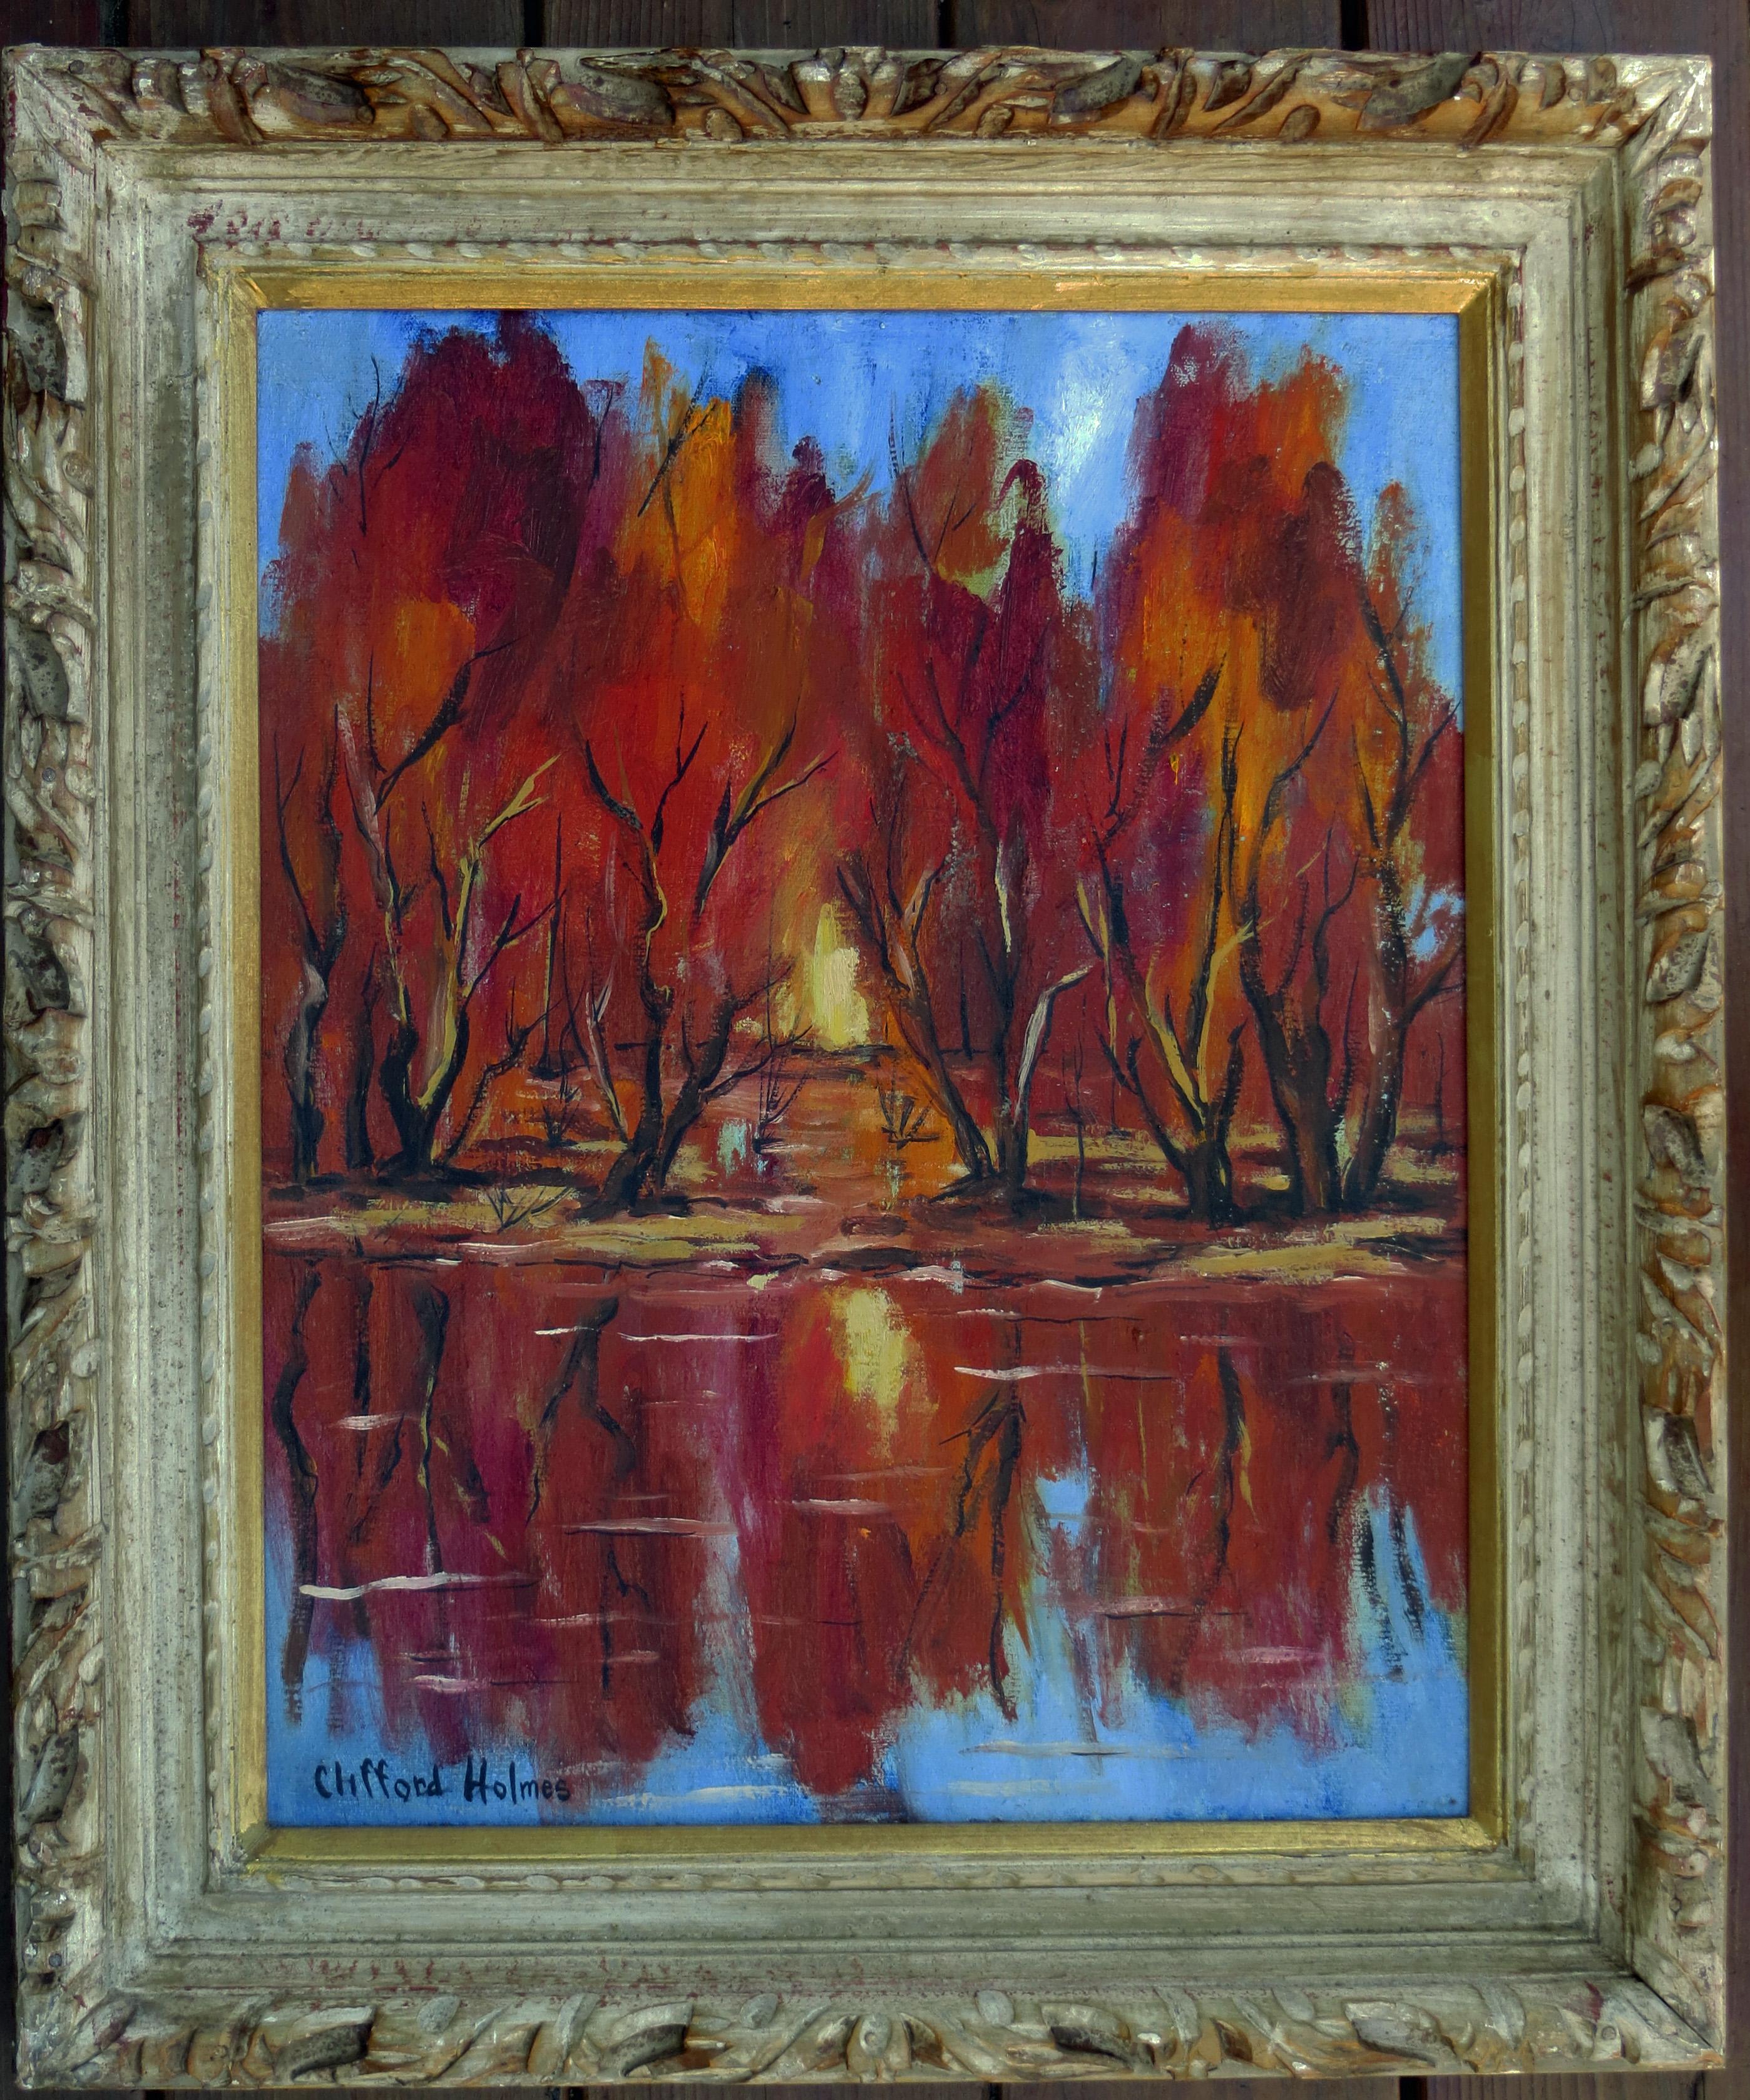 Clifford Holmes Landscape Painting - October Maples